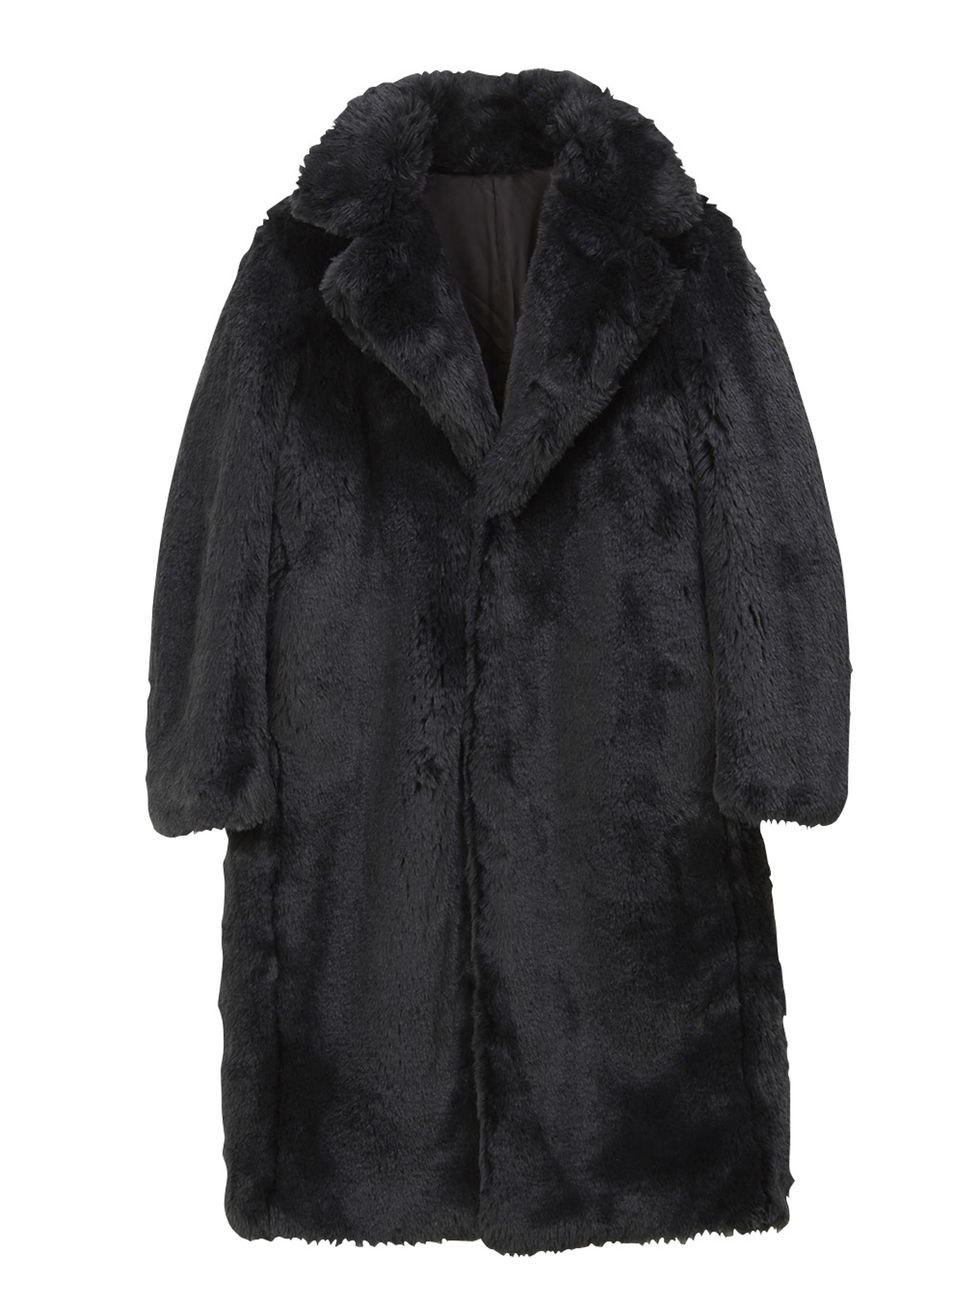 Sleeve, Textile, Outerwear, Style, Natural material, Fashion, Jacket, Black, Fur, Fur clothing, 